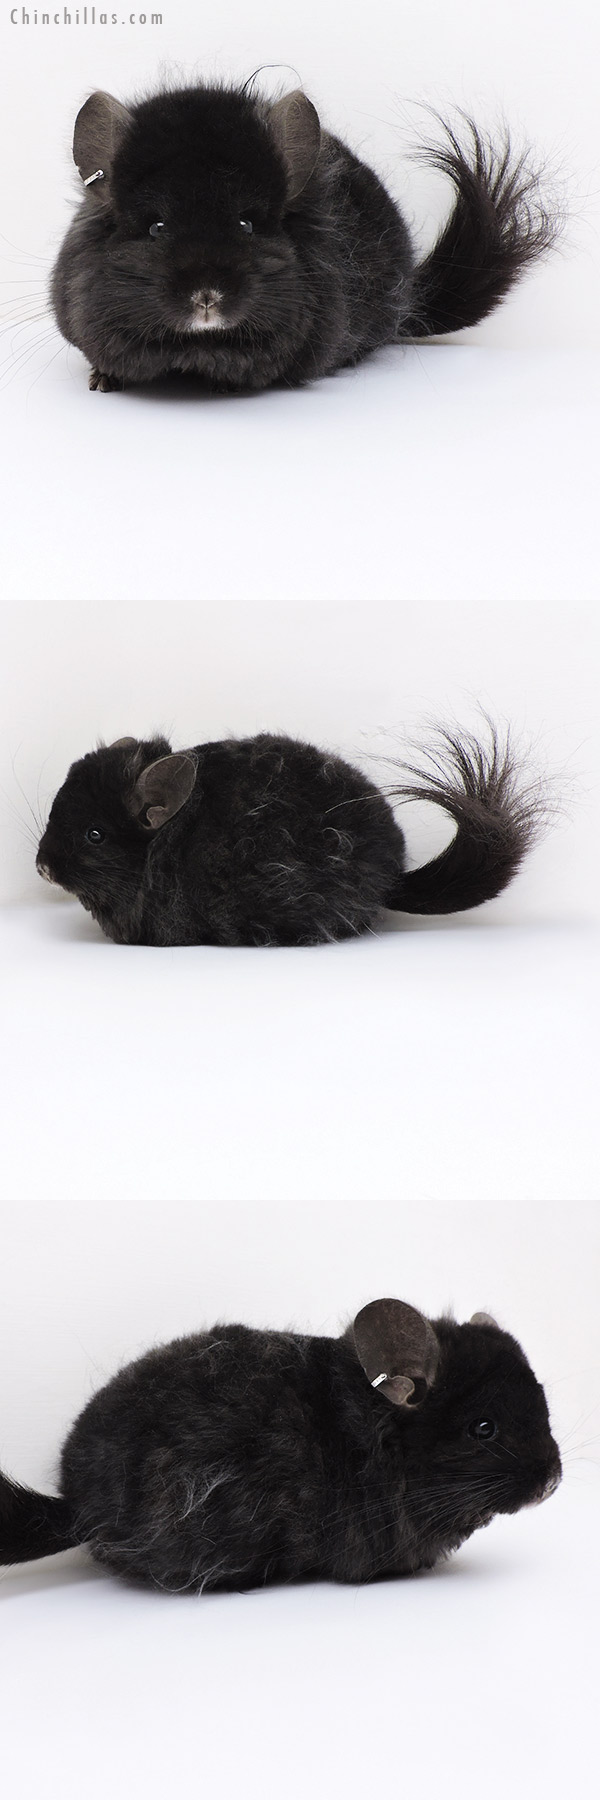 Chinchilla or related item offered for sale or export on Chinchillas.com - 19136 Ebony  Royal Imperial Angora Male Chinchilla